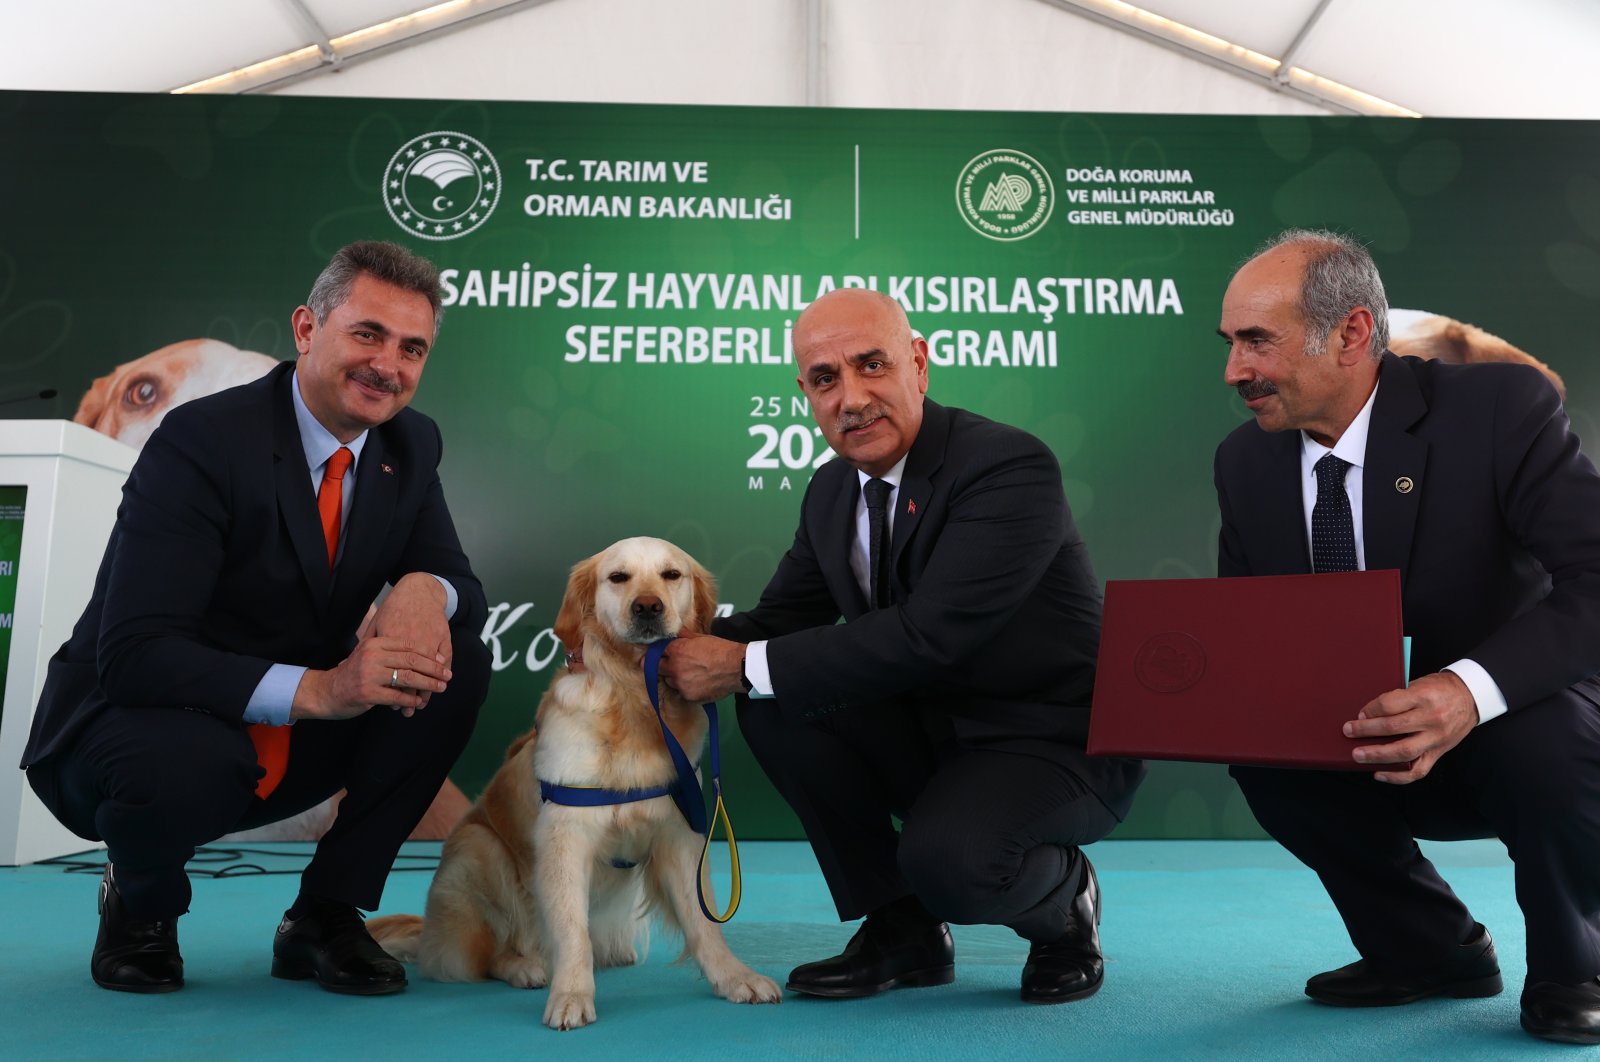 Agriculture and Forestry Minister Vahit Kirişçi (C) pets a dog he adopted during the event, in the capital Ankara, Turkey, April 25, 2022. (AA PHOTO)